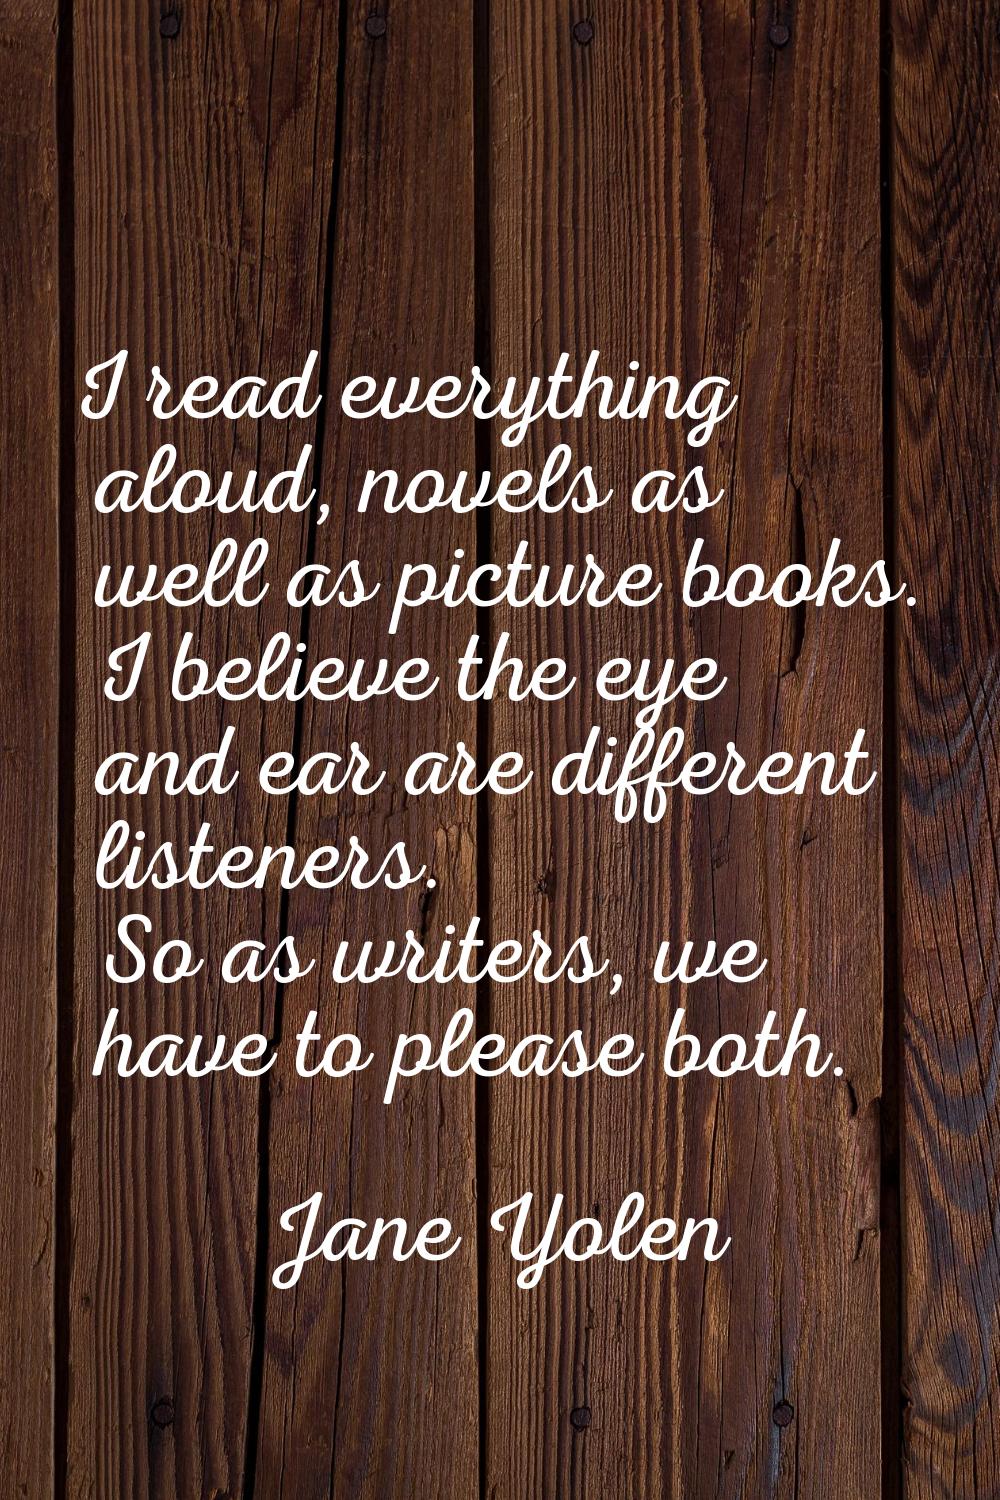 I read everything aloud, novels as well as picture books. I believe the eye and ear are different l